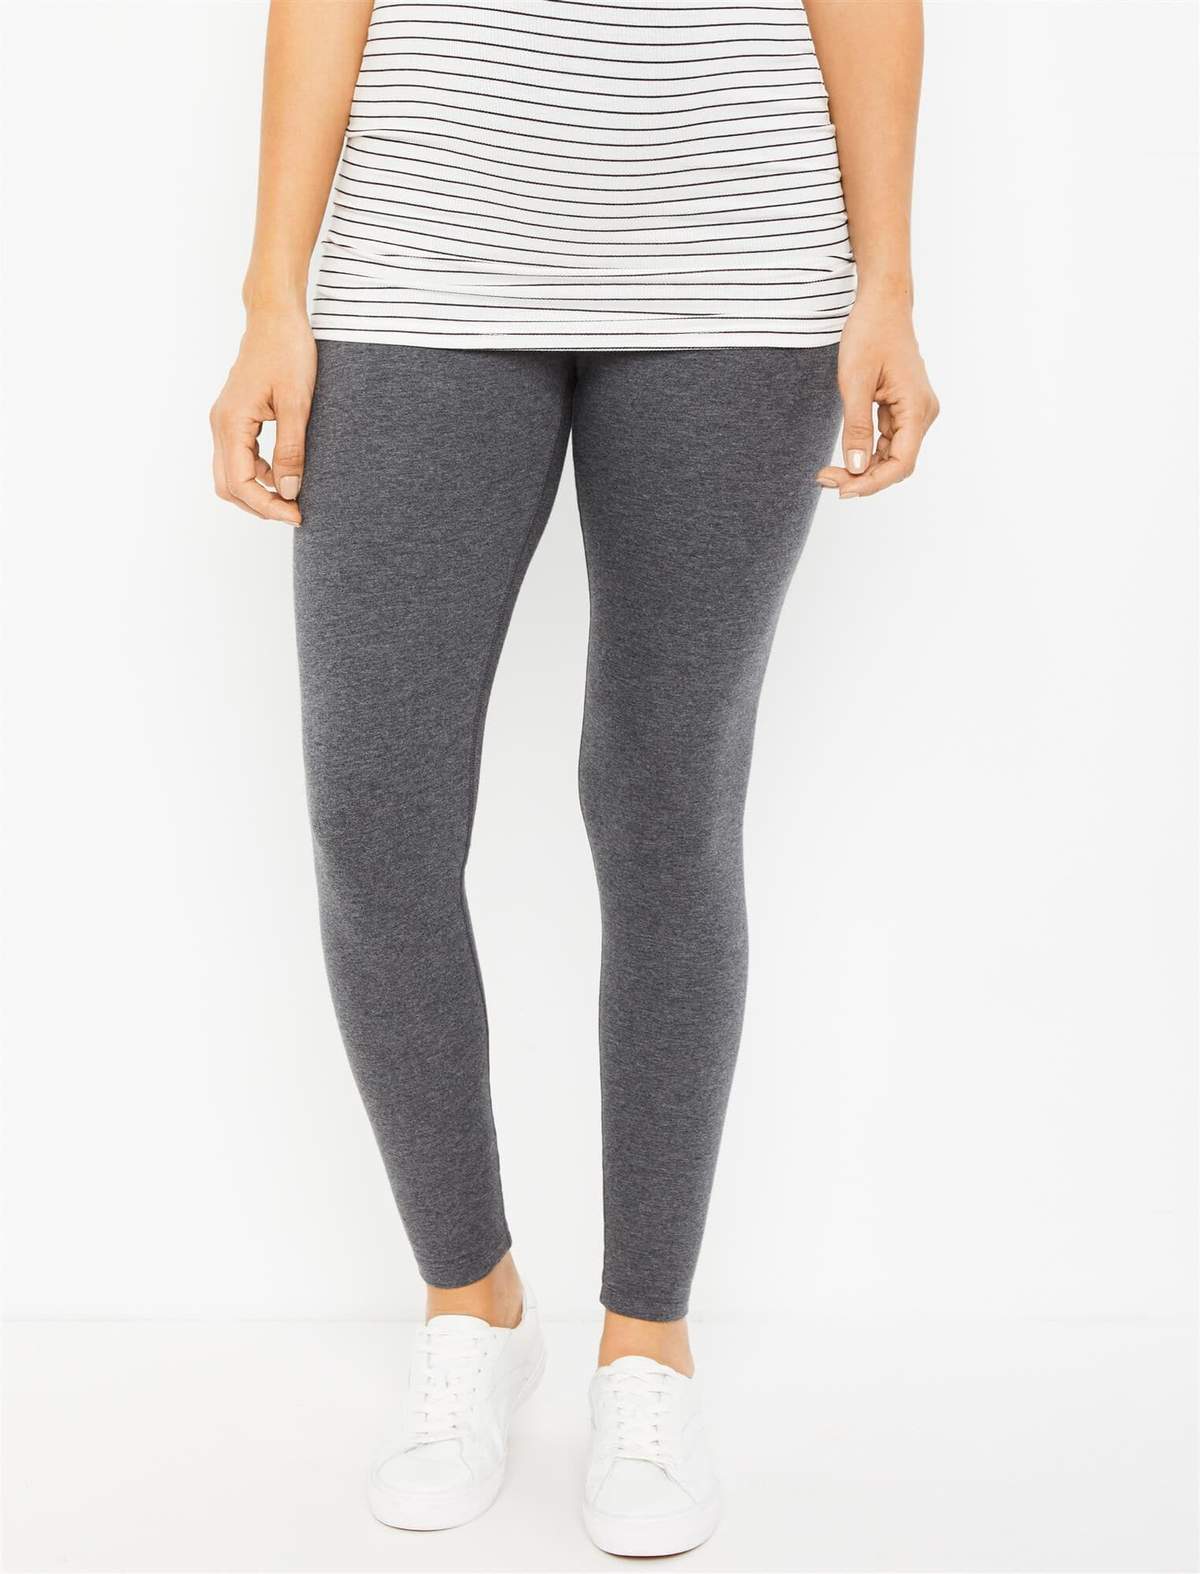 French Terry Maternity Yoga Pants